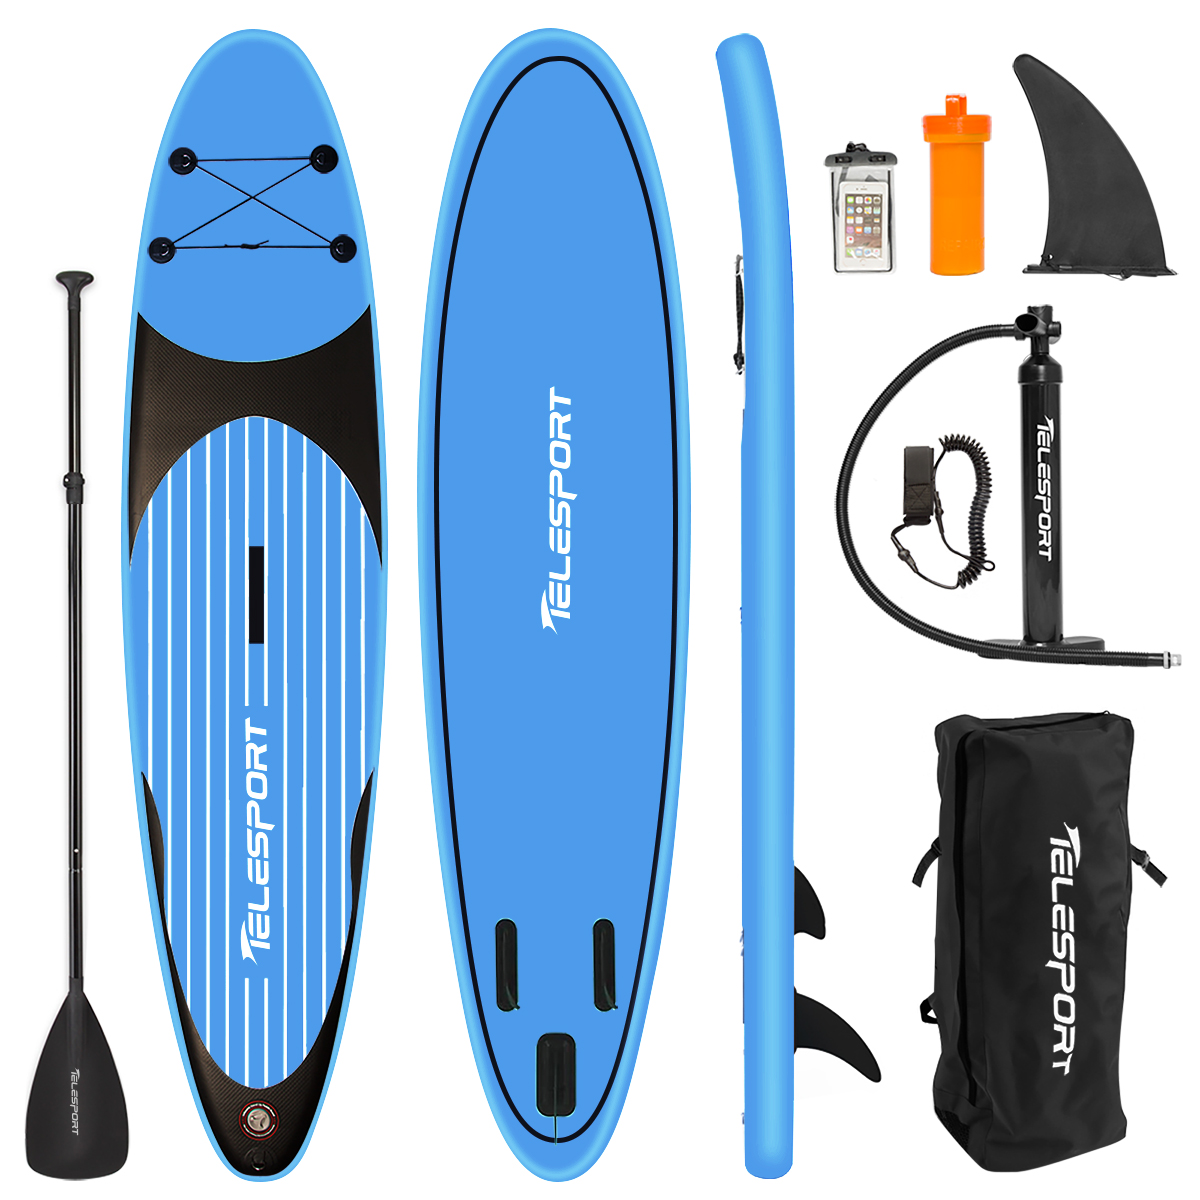 Telesport Inflatable Stand Up Paddle Board 10.6ft with SUP Carry Bag, Adjustable Paddles Non-Slip Deck, Leash and Fin for Padding Surfing - image 1 of 7